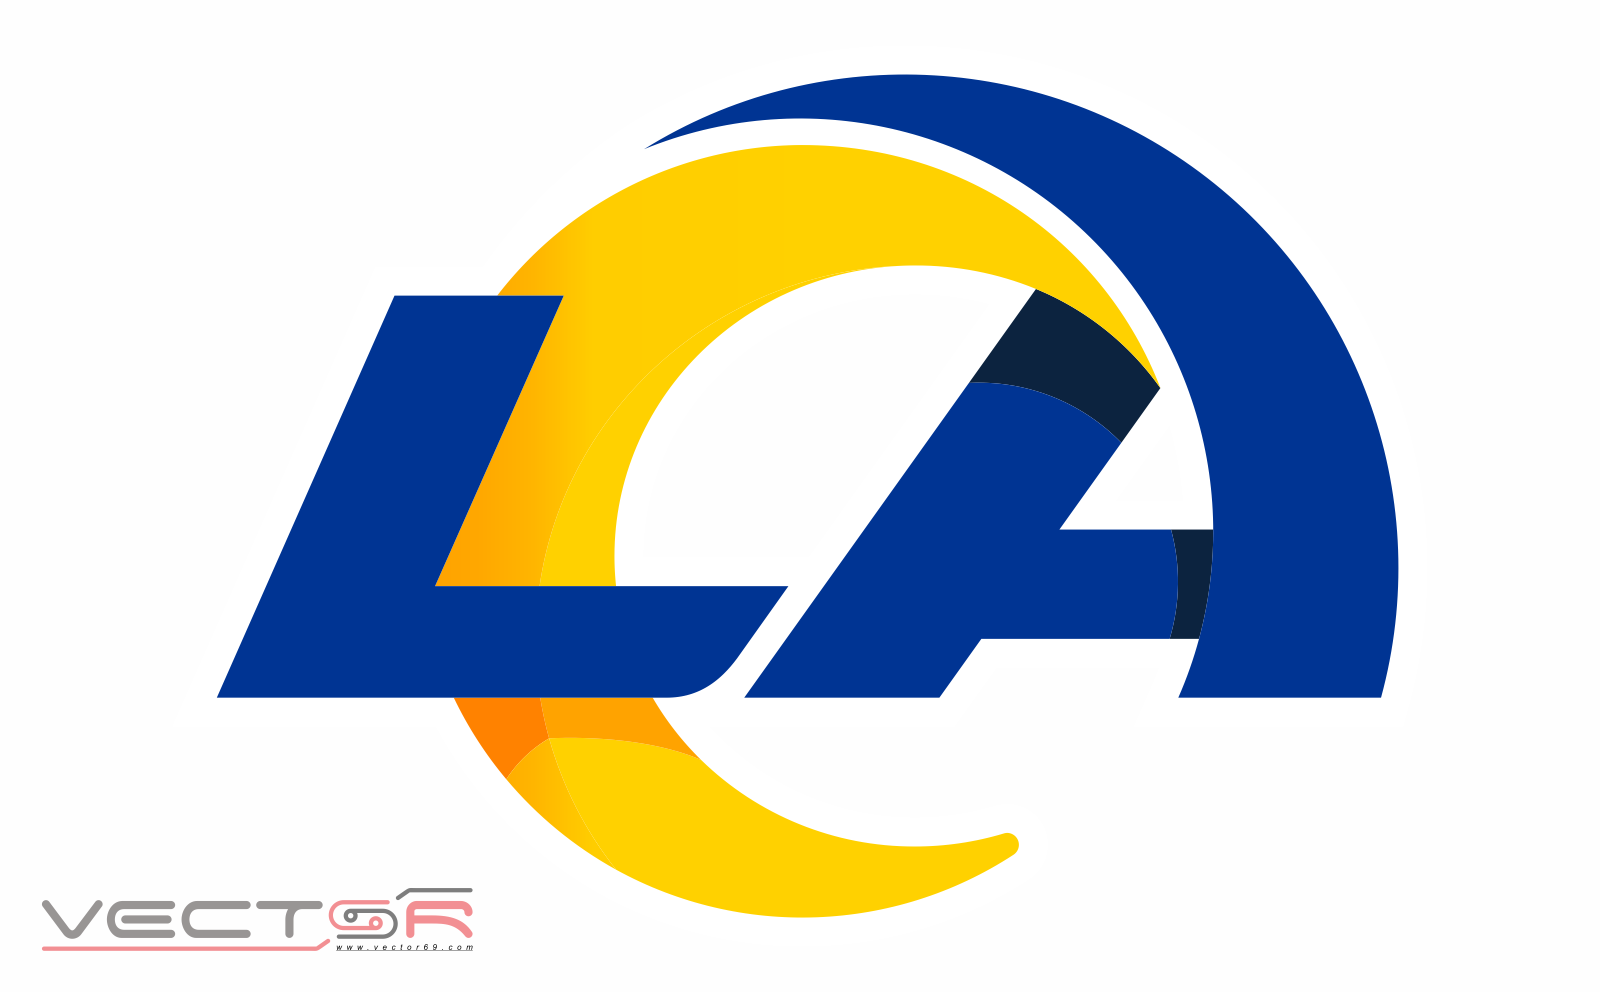 Los Angeles Rams (2020) Logo Light Background - Download Transparent Images, Portable Network Graphics (.PNG)